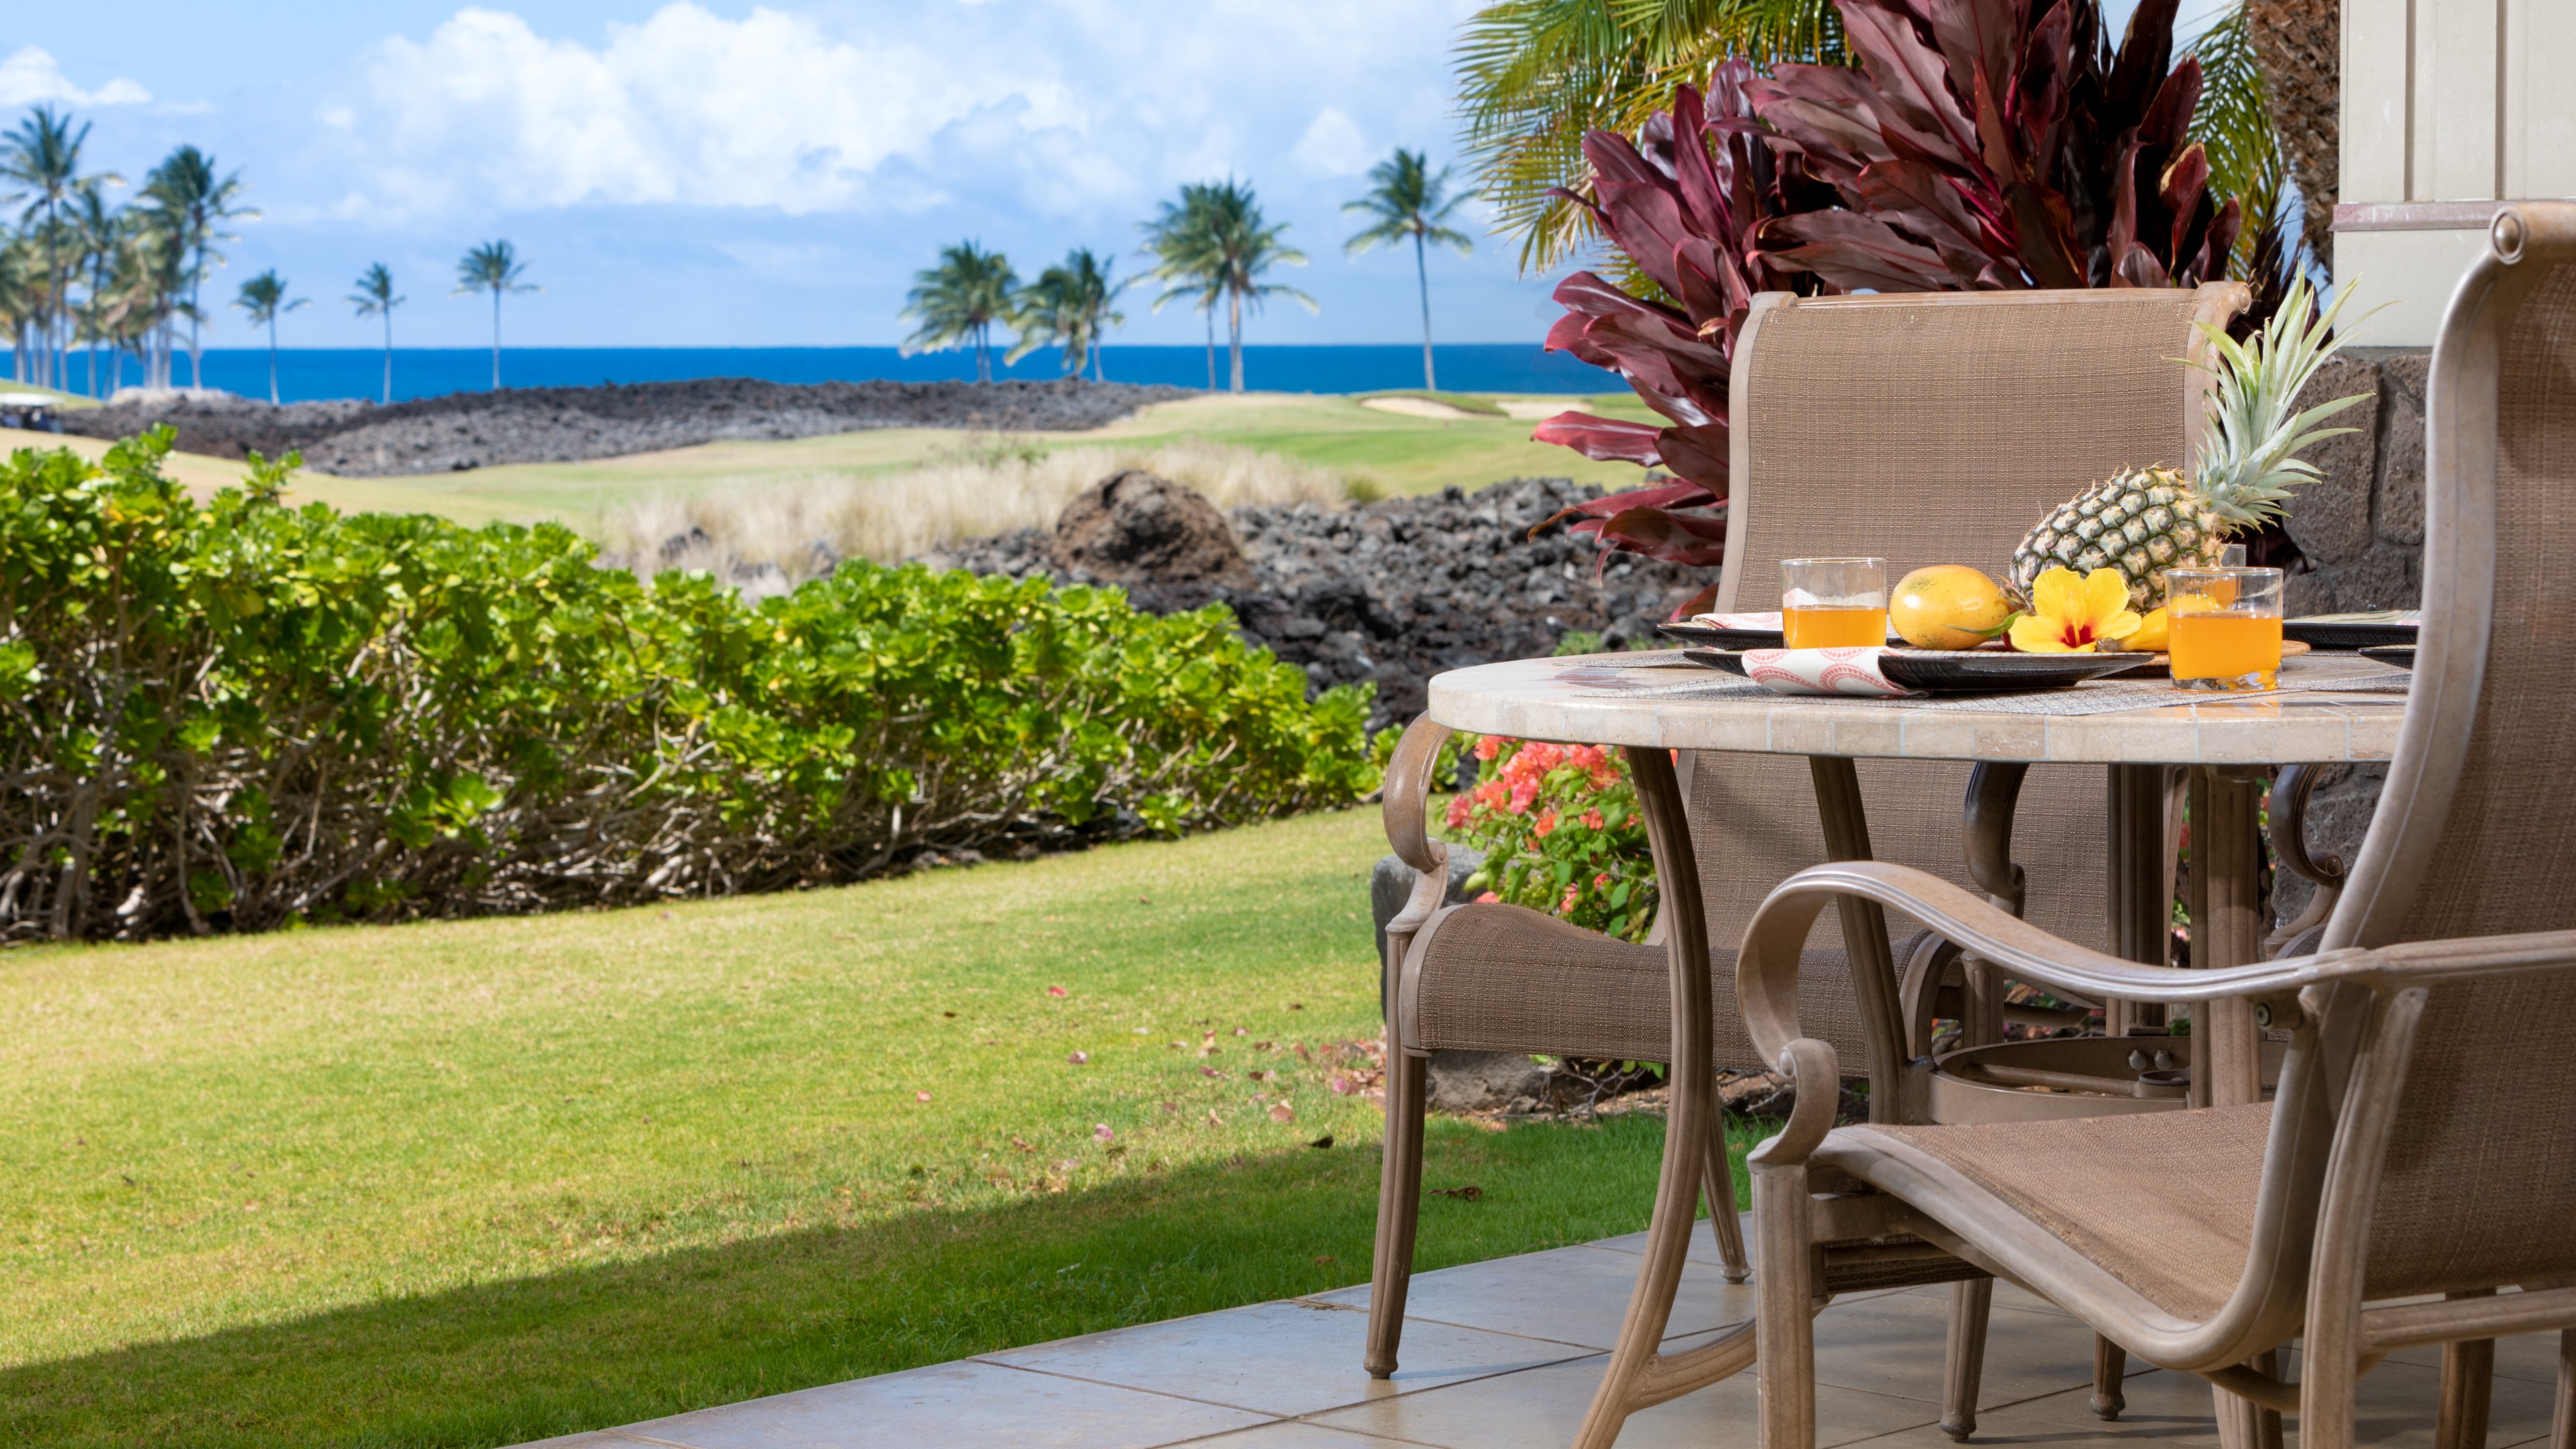 Welcome to By the Sea Villa in the Hali'i Kai gated community at the Waikoloa Beach Resort